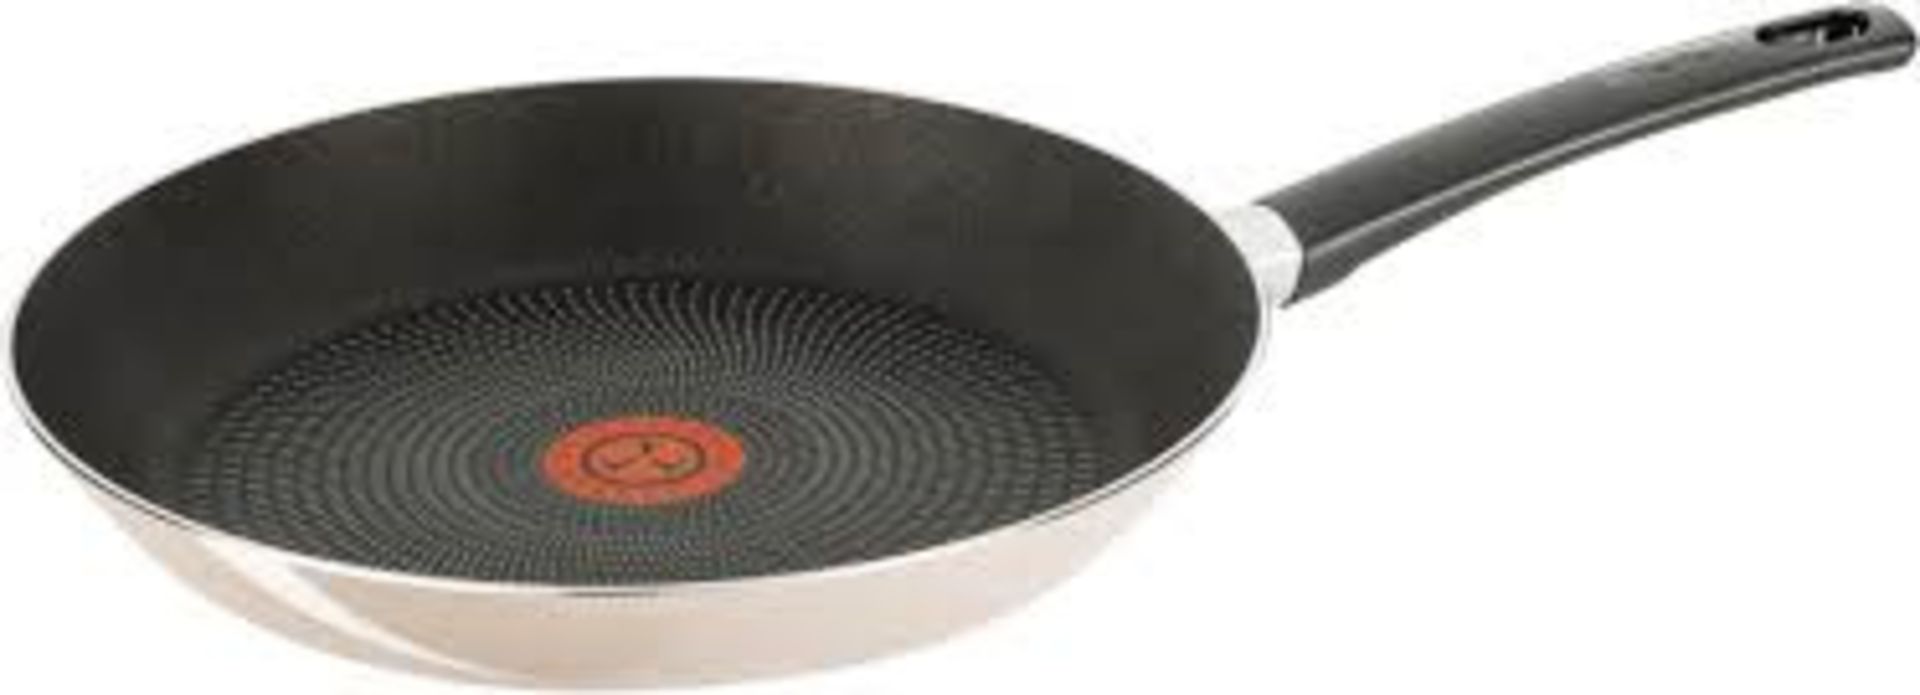 V Brand New Tefal Limited Edition Fry Pan-28cm-Power Glide-Non Stick-Thermo Spot-Oven To Cooker